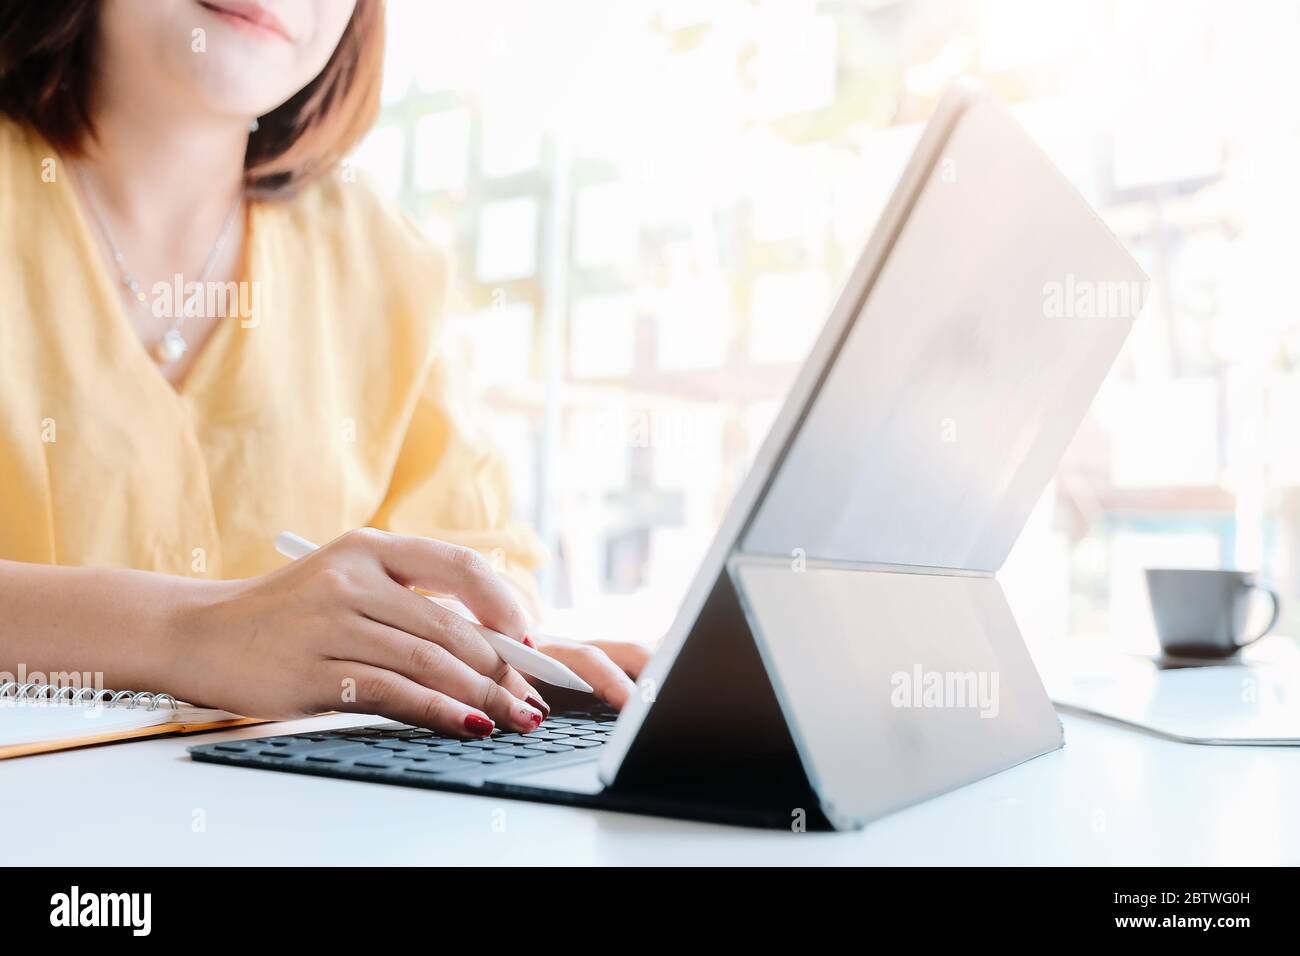 Woman using smart tablet computer for accounting or financial analysis Stock Photo